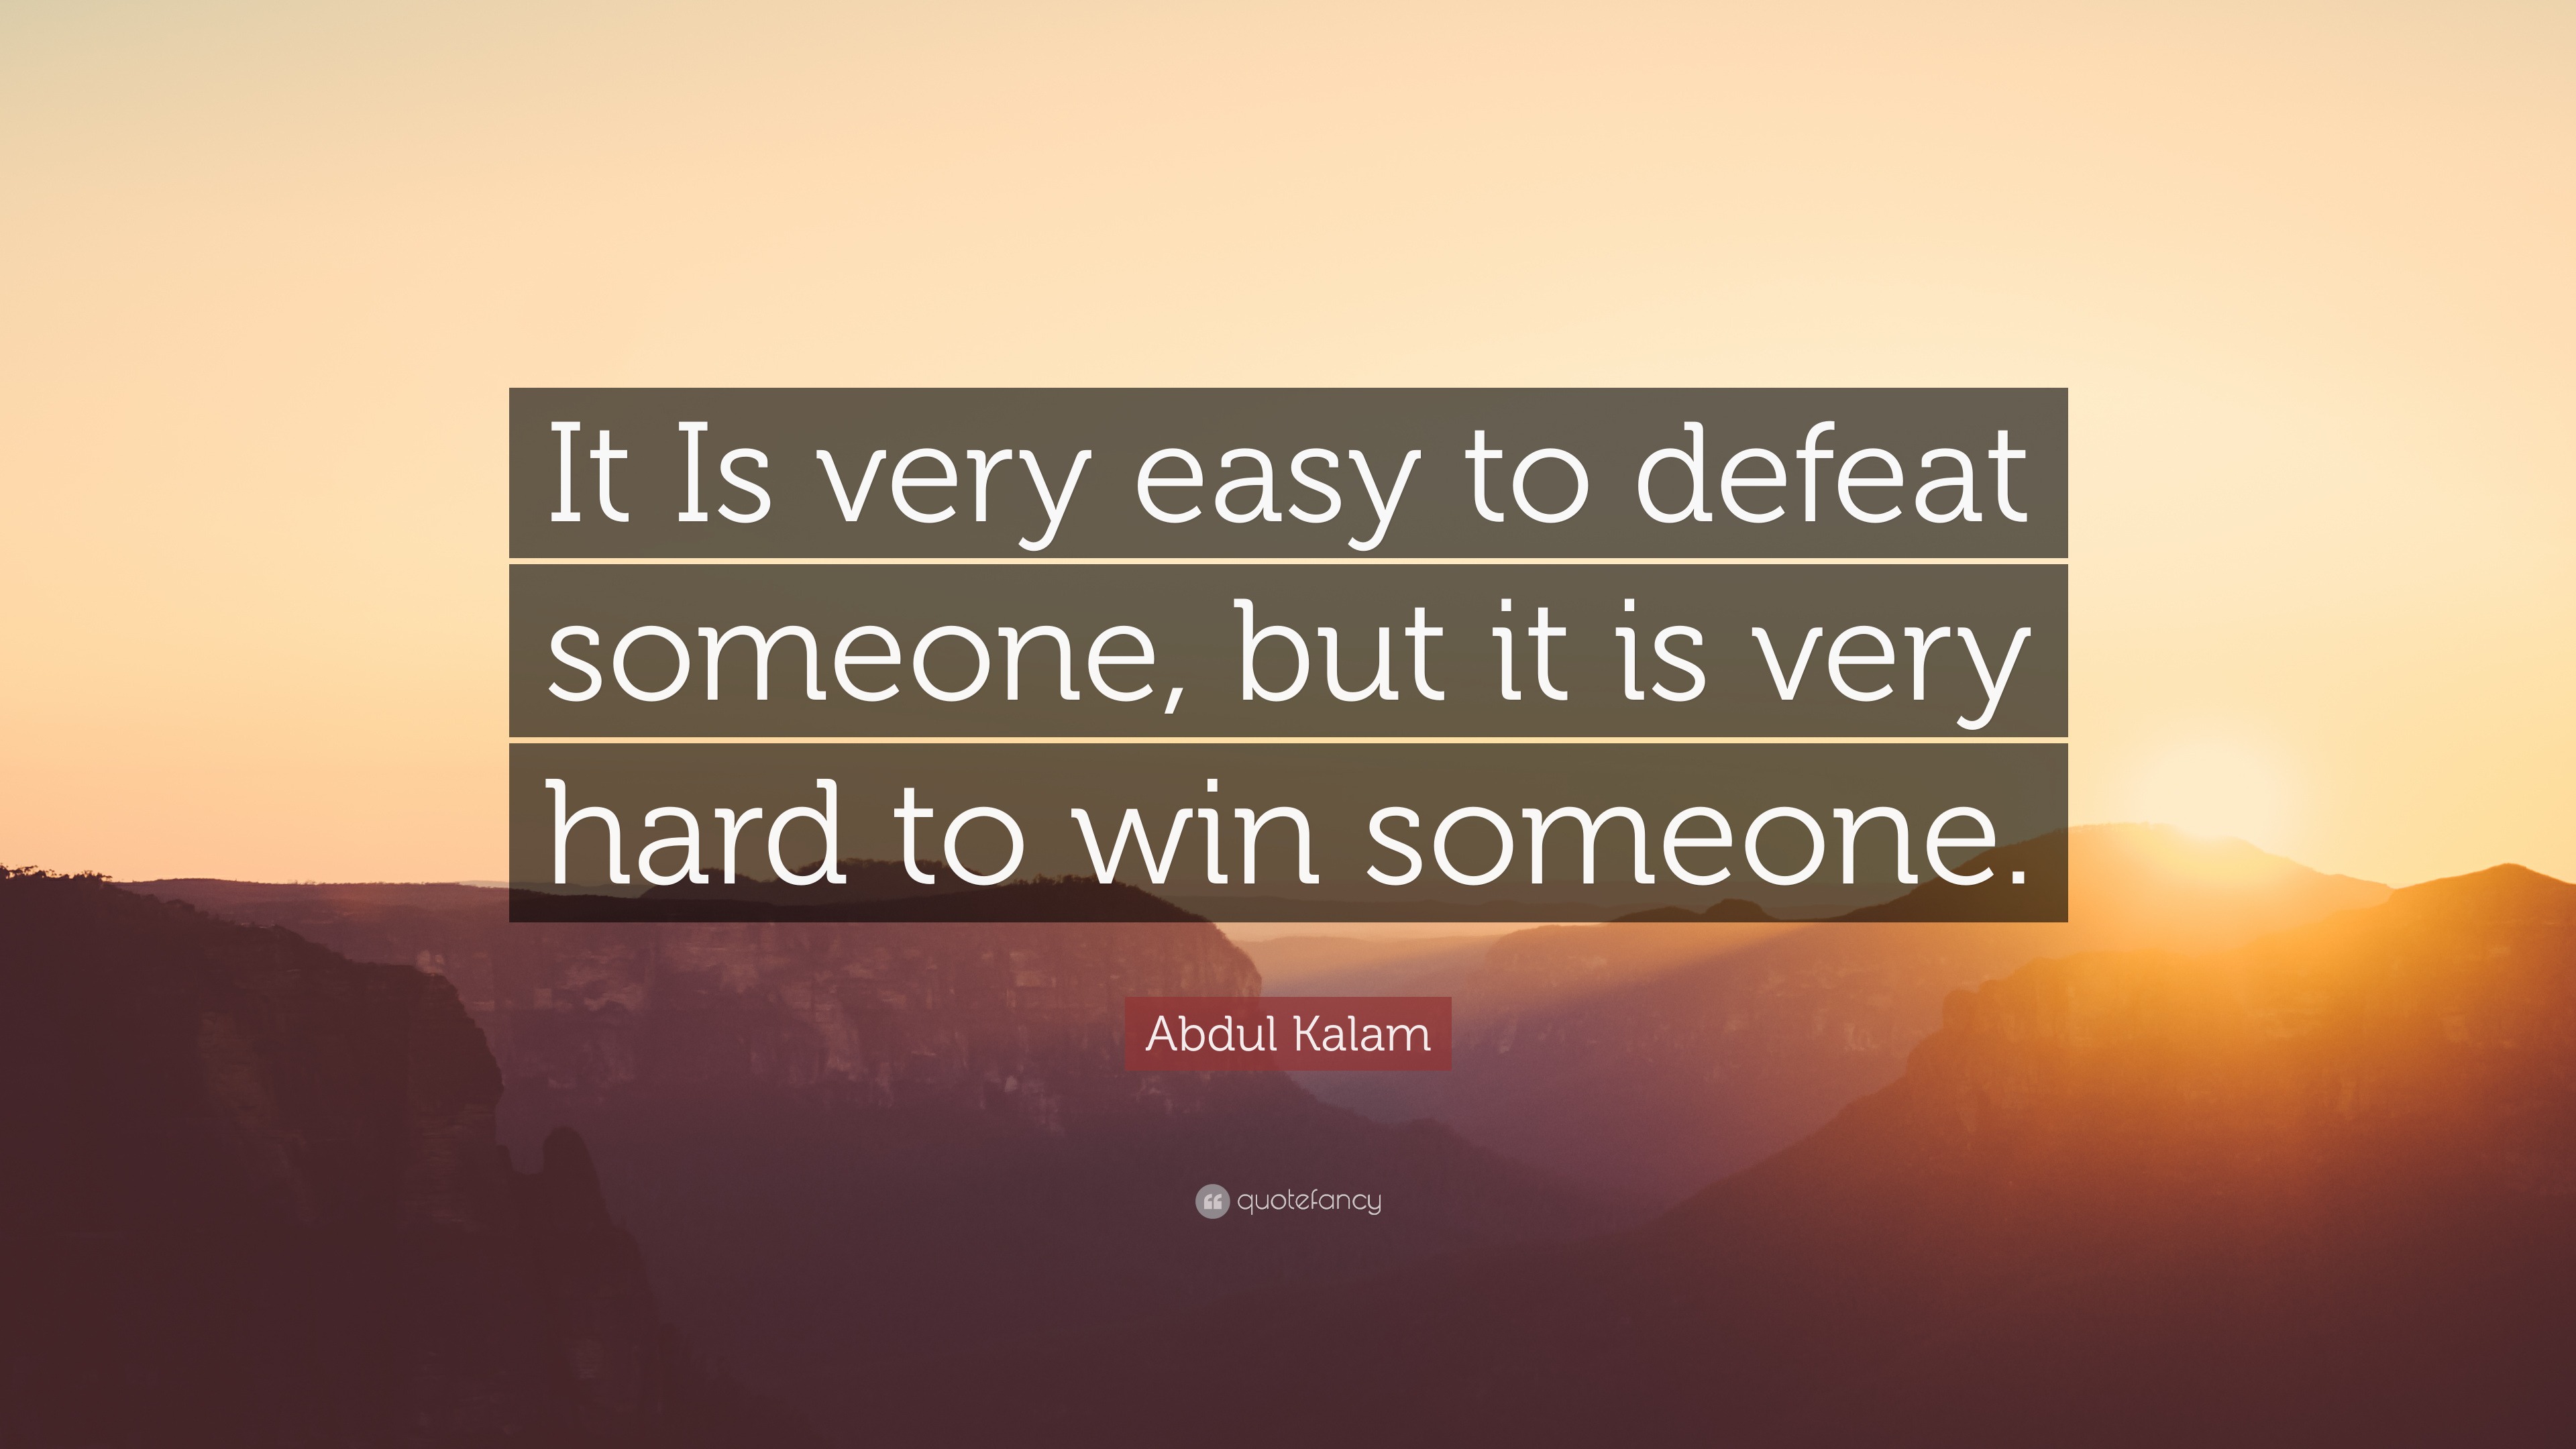 Abdul Kalam Quote: “It Is very easy to defeat someone, but it is very ...